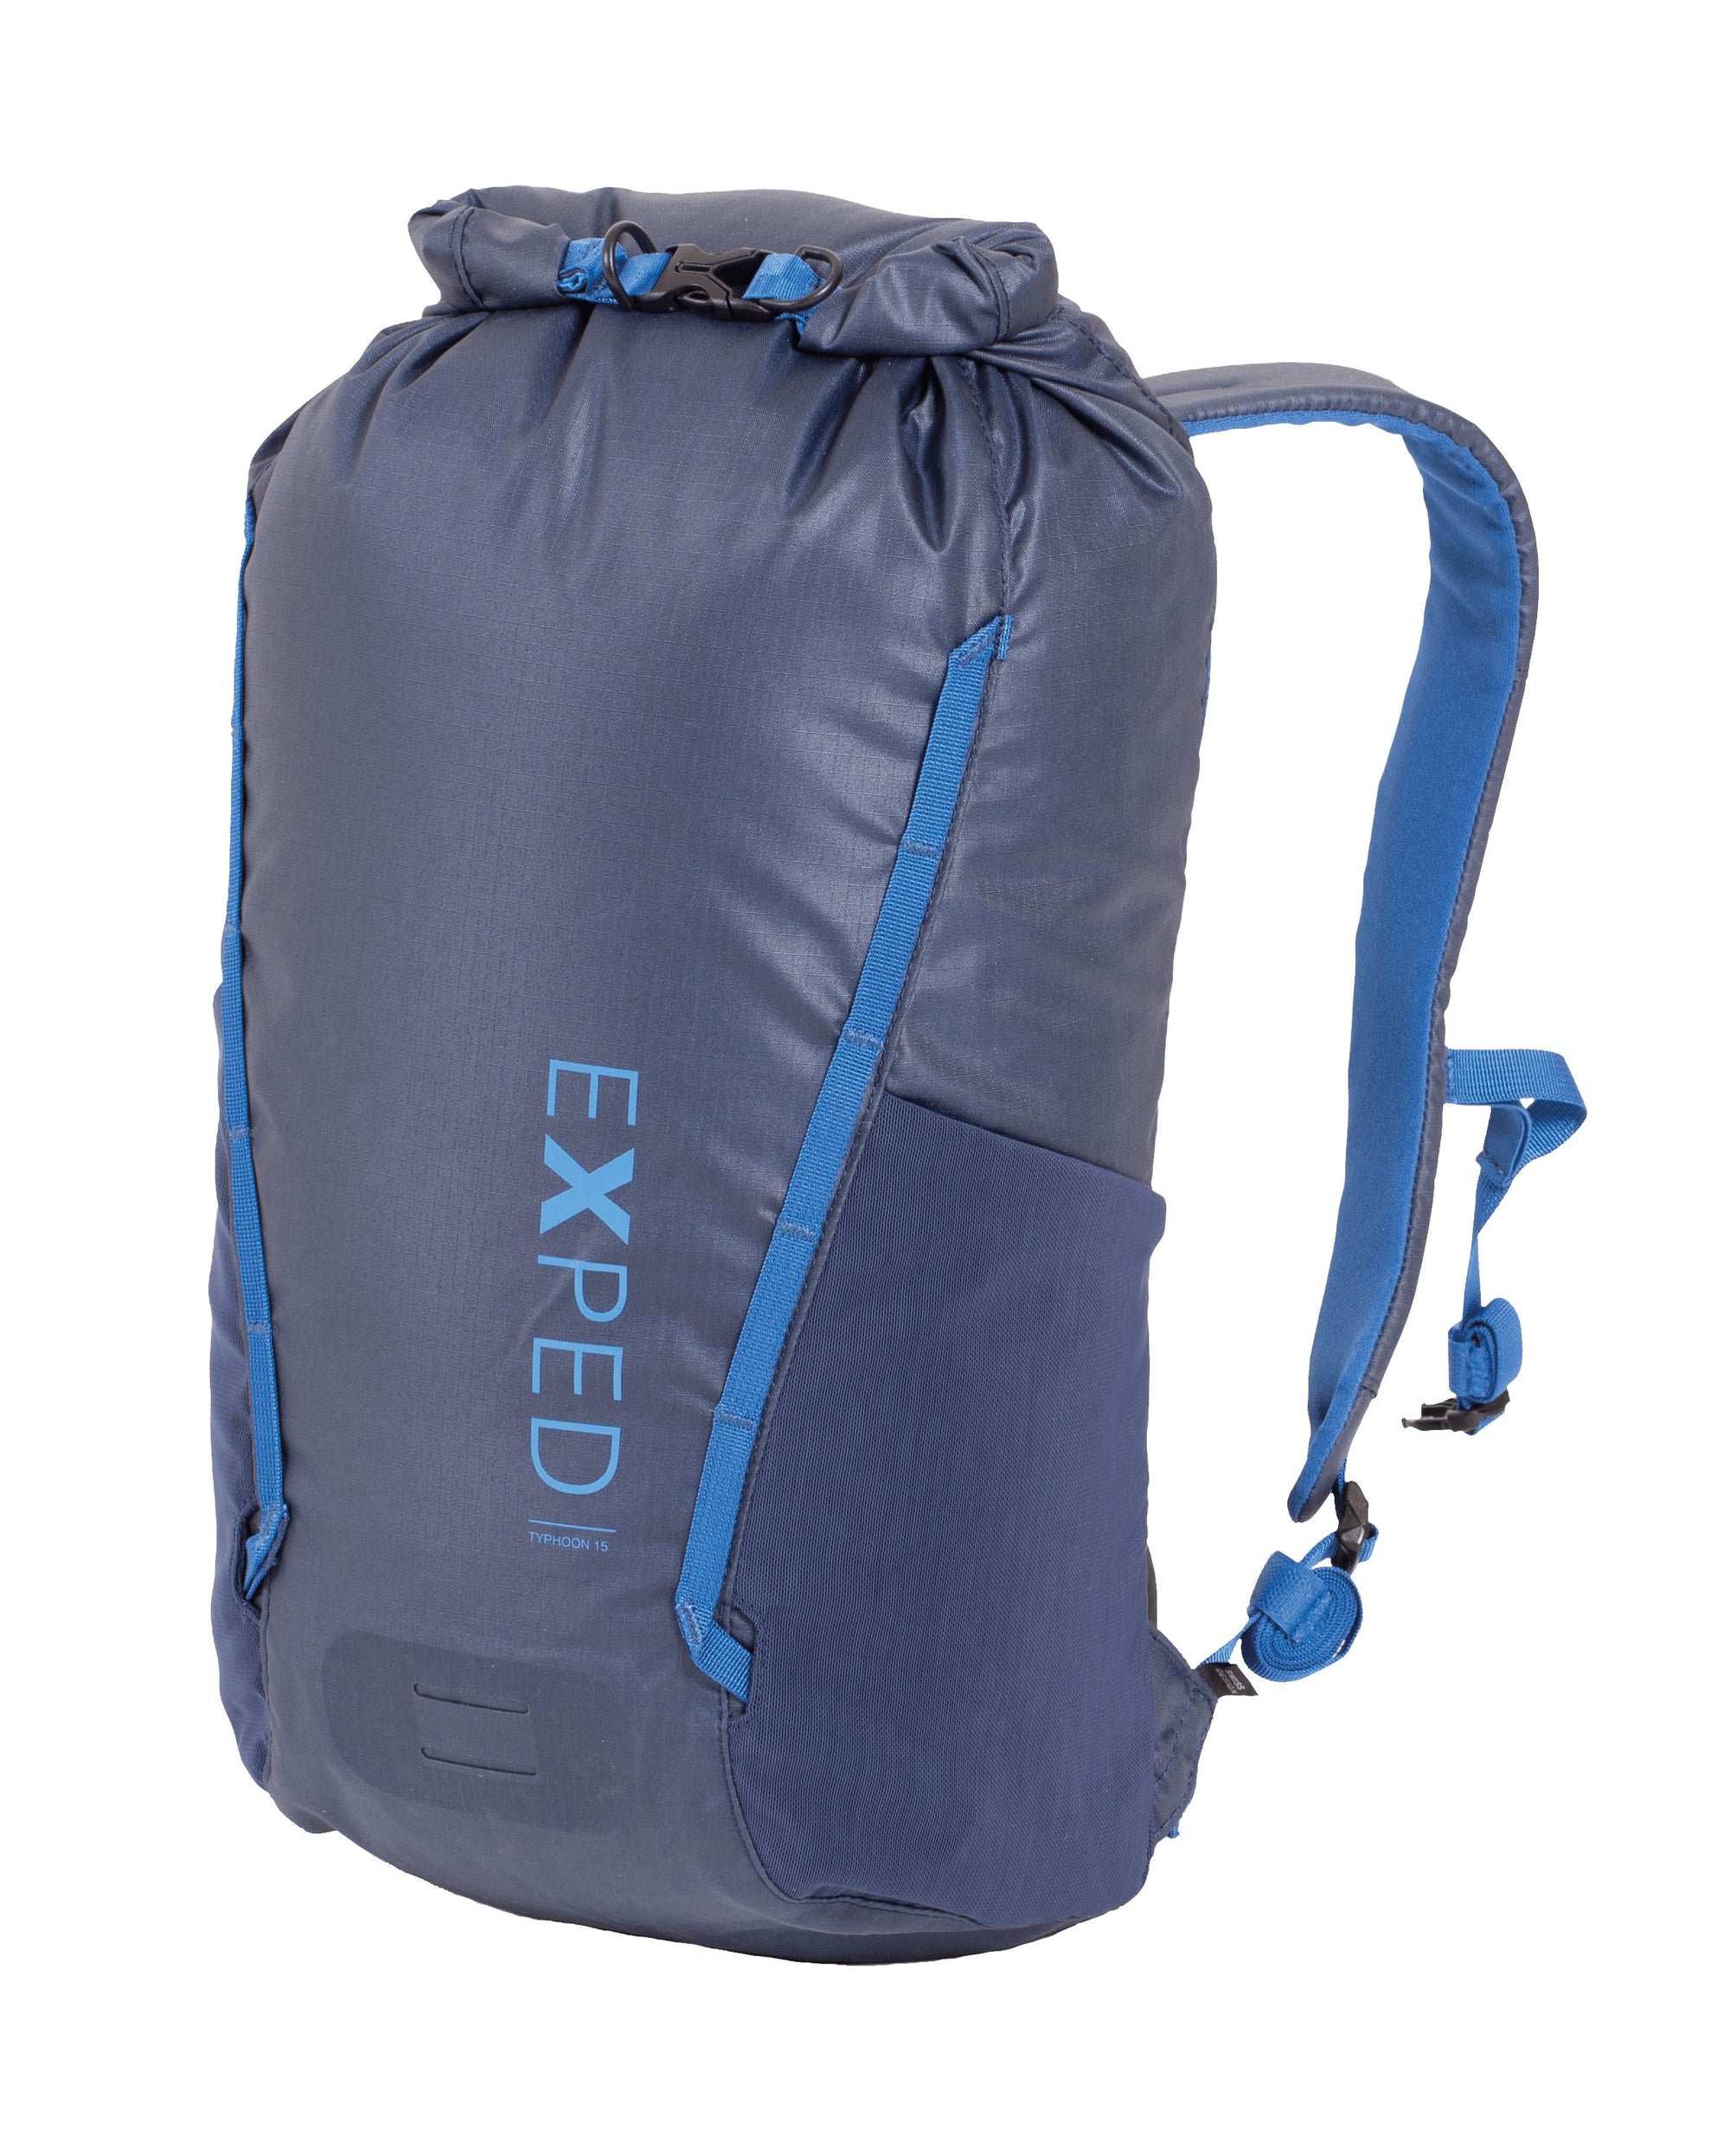 EXPED Typhoon 15 Backpack Forest 